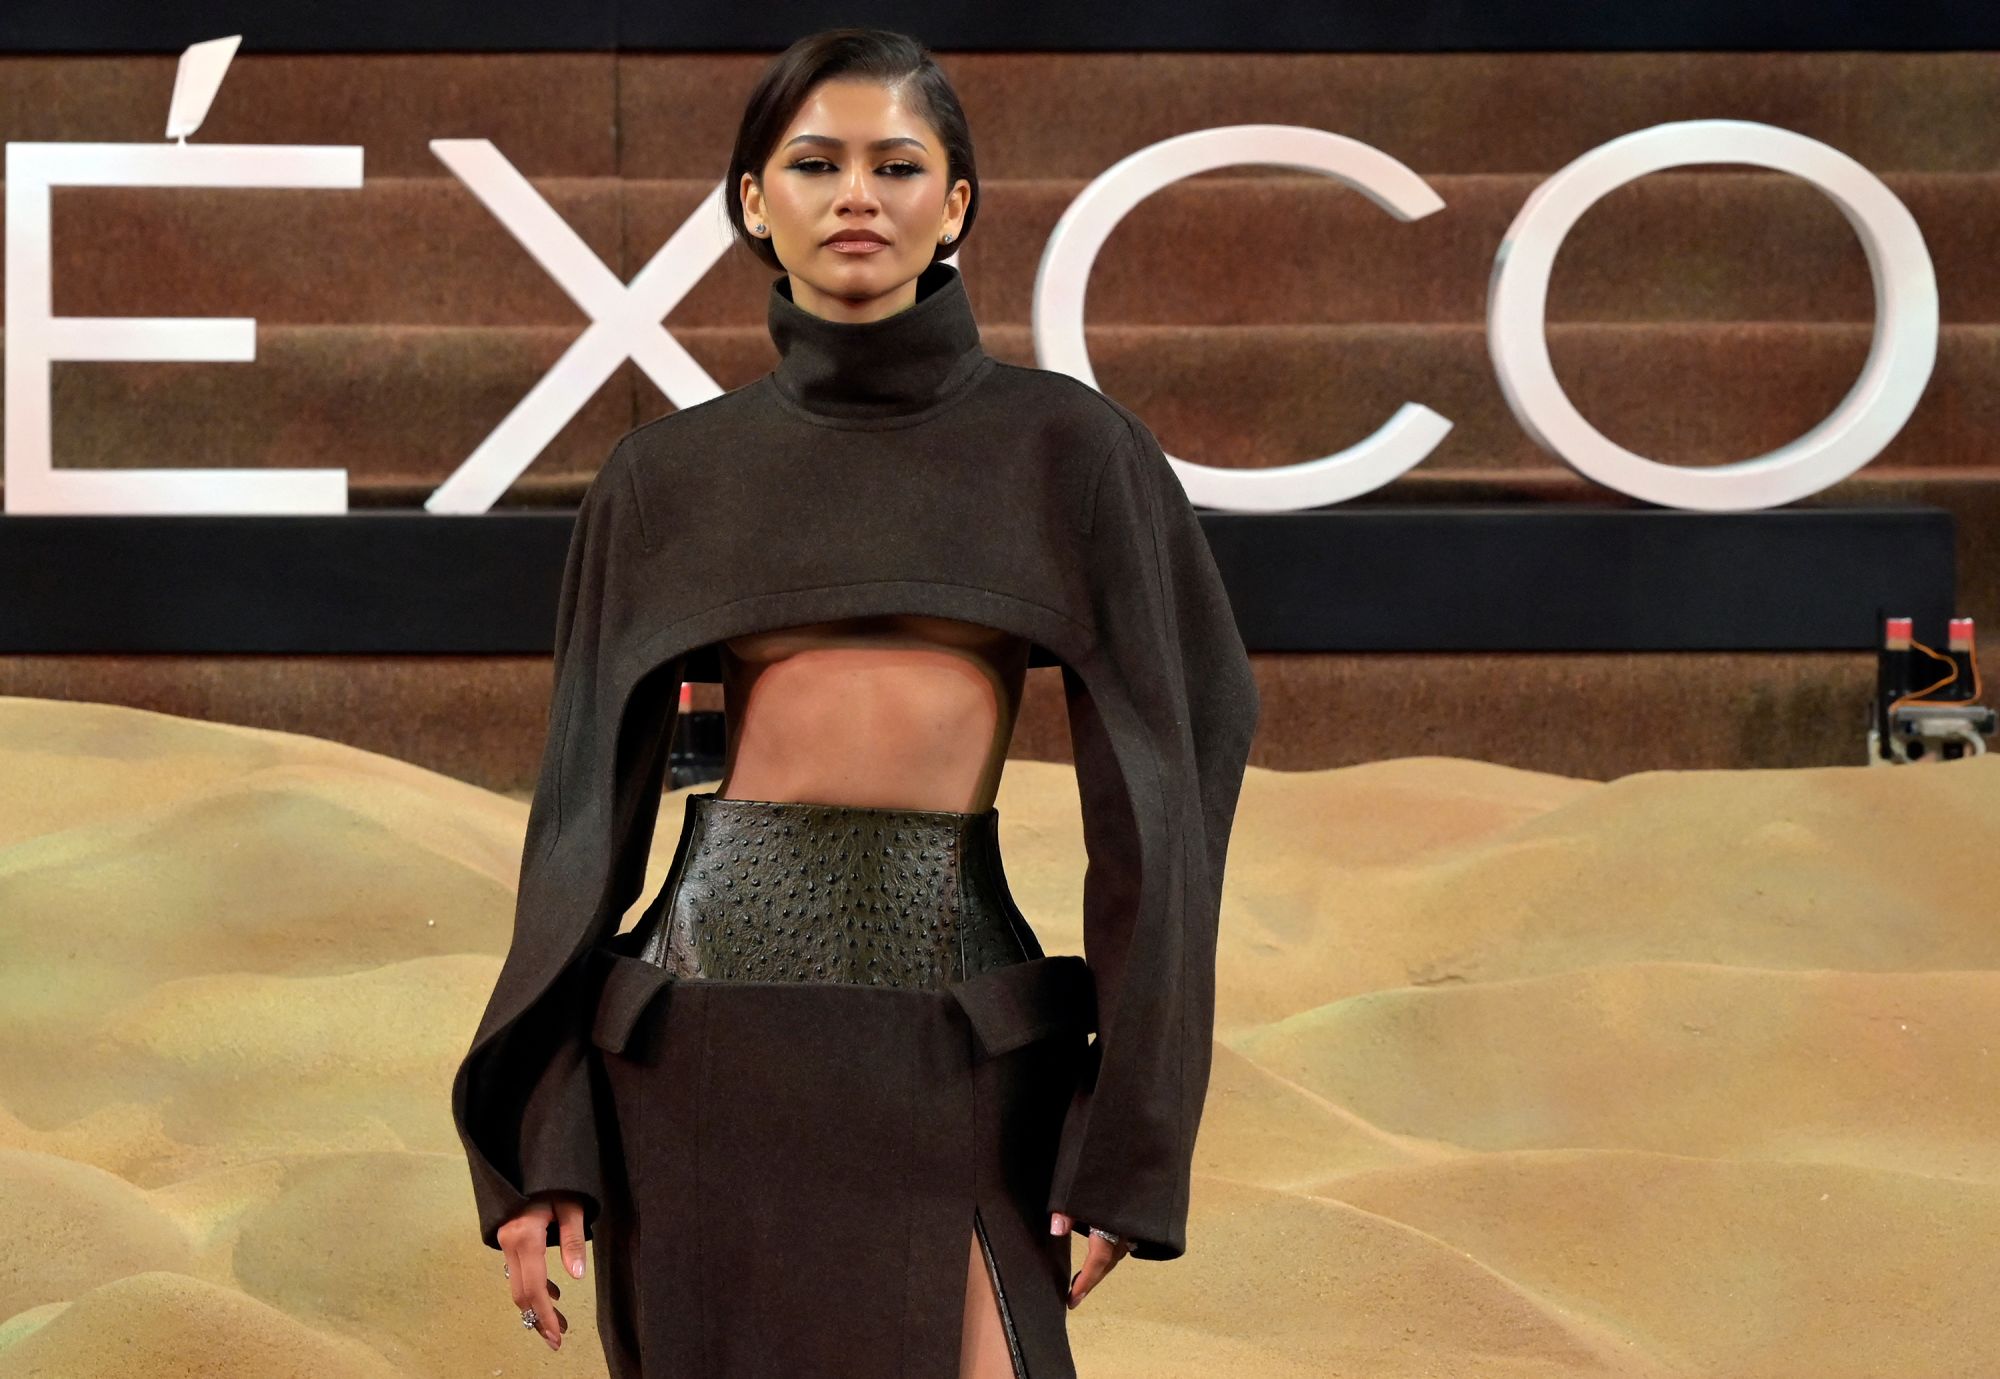 The starlet has been commanding attention with her "Dune" inspired red carpet looks.